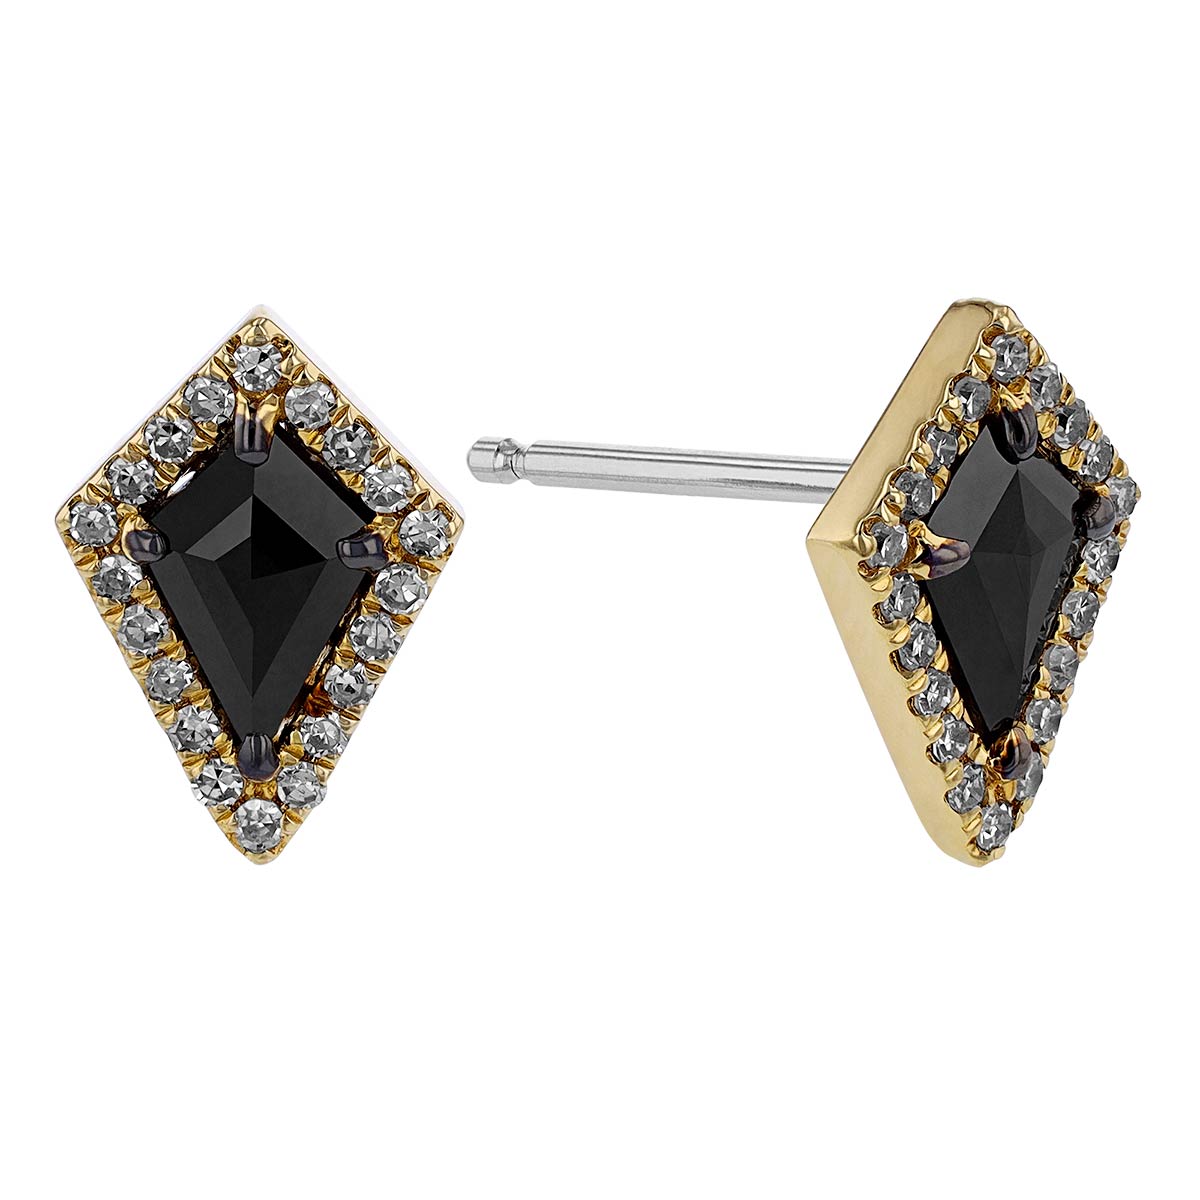 Details about   Mens 14k Black Gold Finish Lab Diamond Kite Style Square Cut Studs Earring 15 mm 